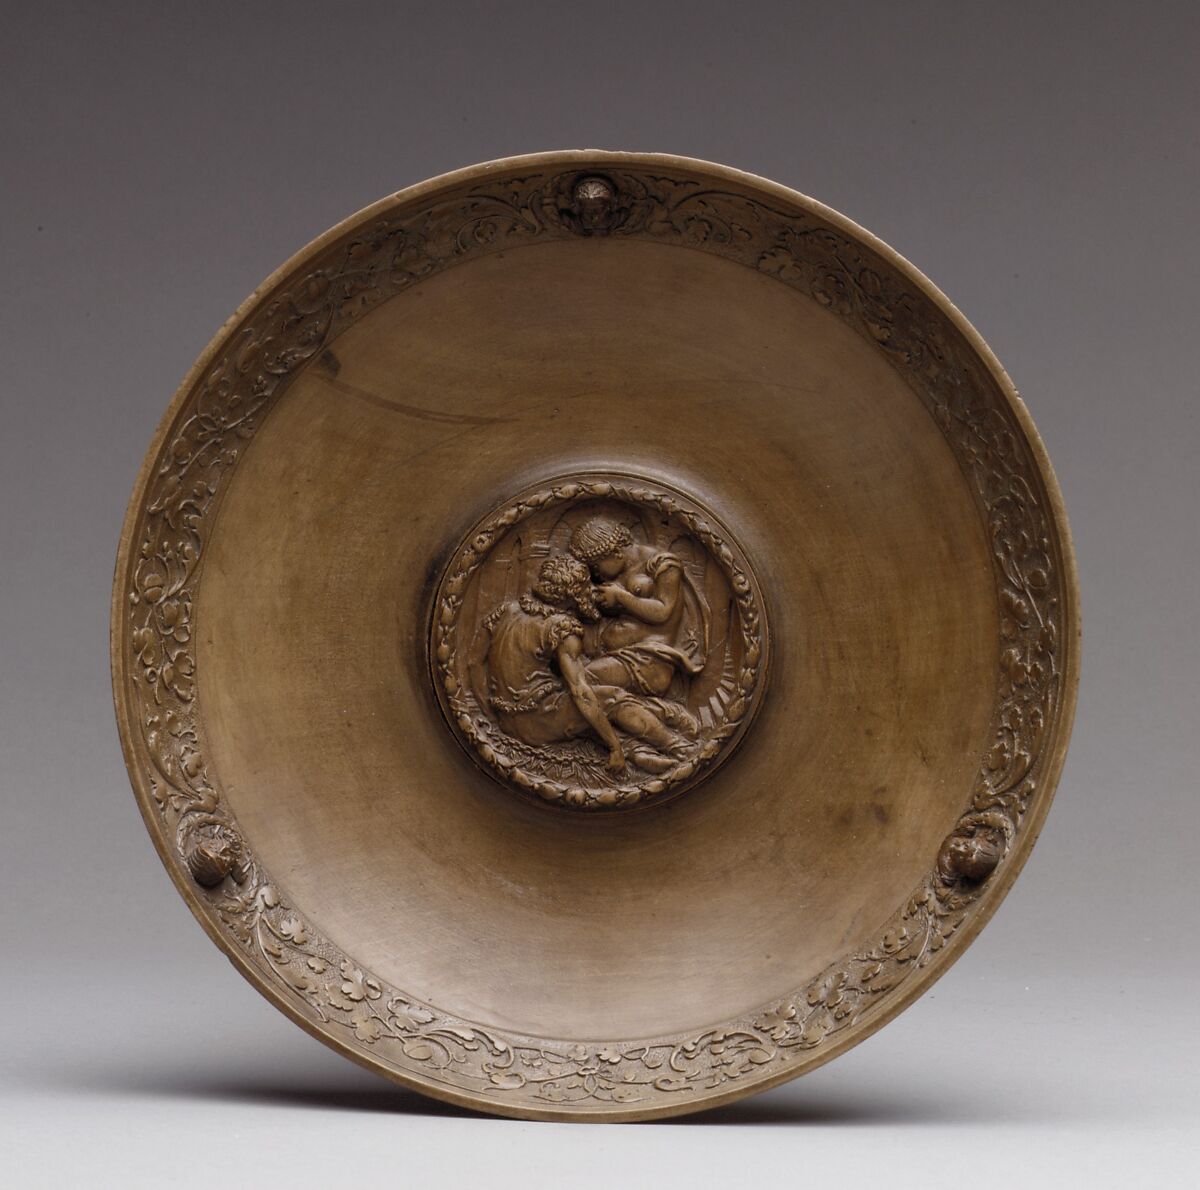 Goldsmith's model for a bowl with a representation of Roman Charity